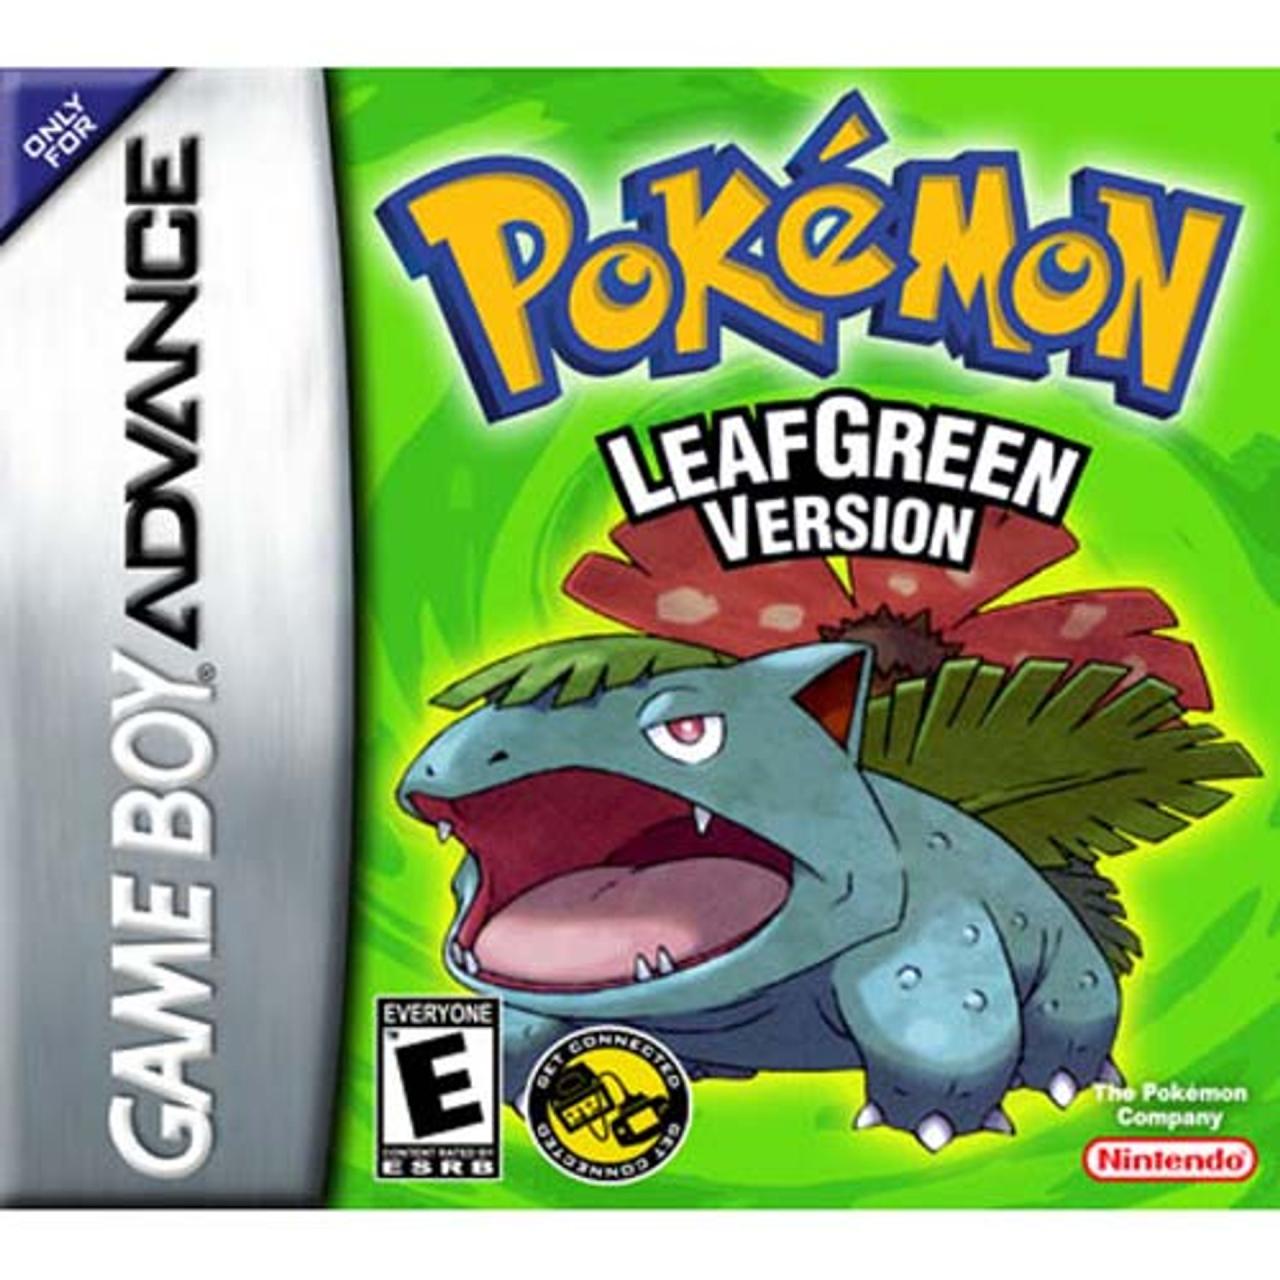 Pokemon leaf green games mobile version pokémon firered lengthy leafgreen players both long find time will